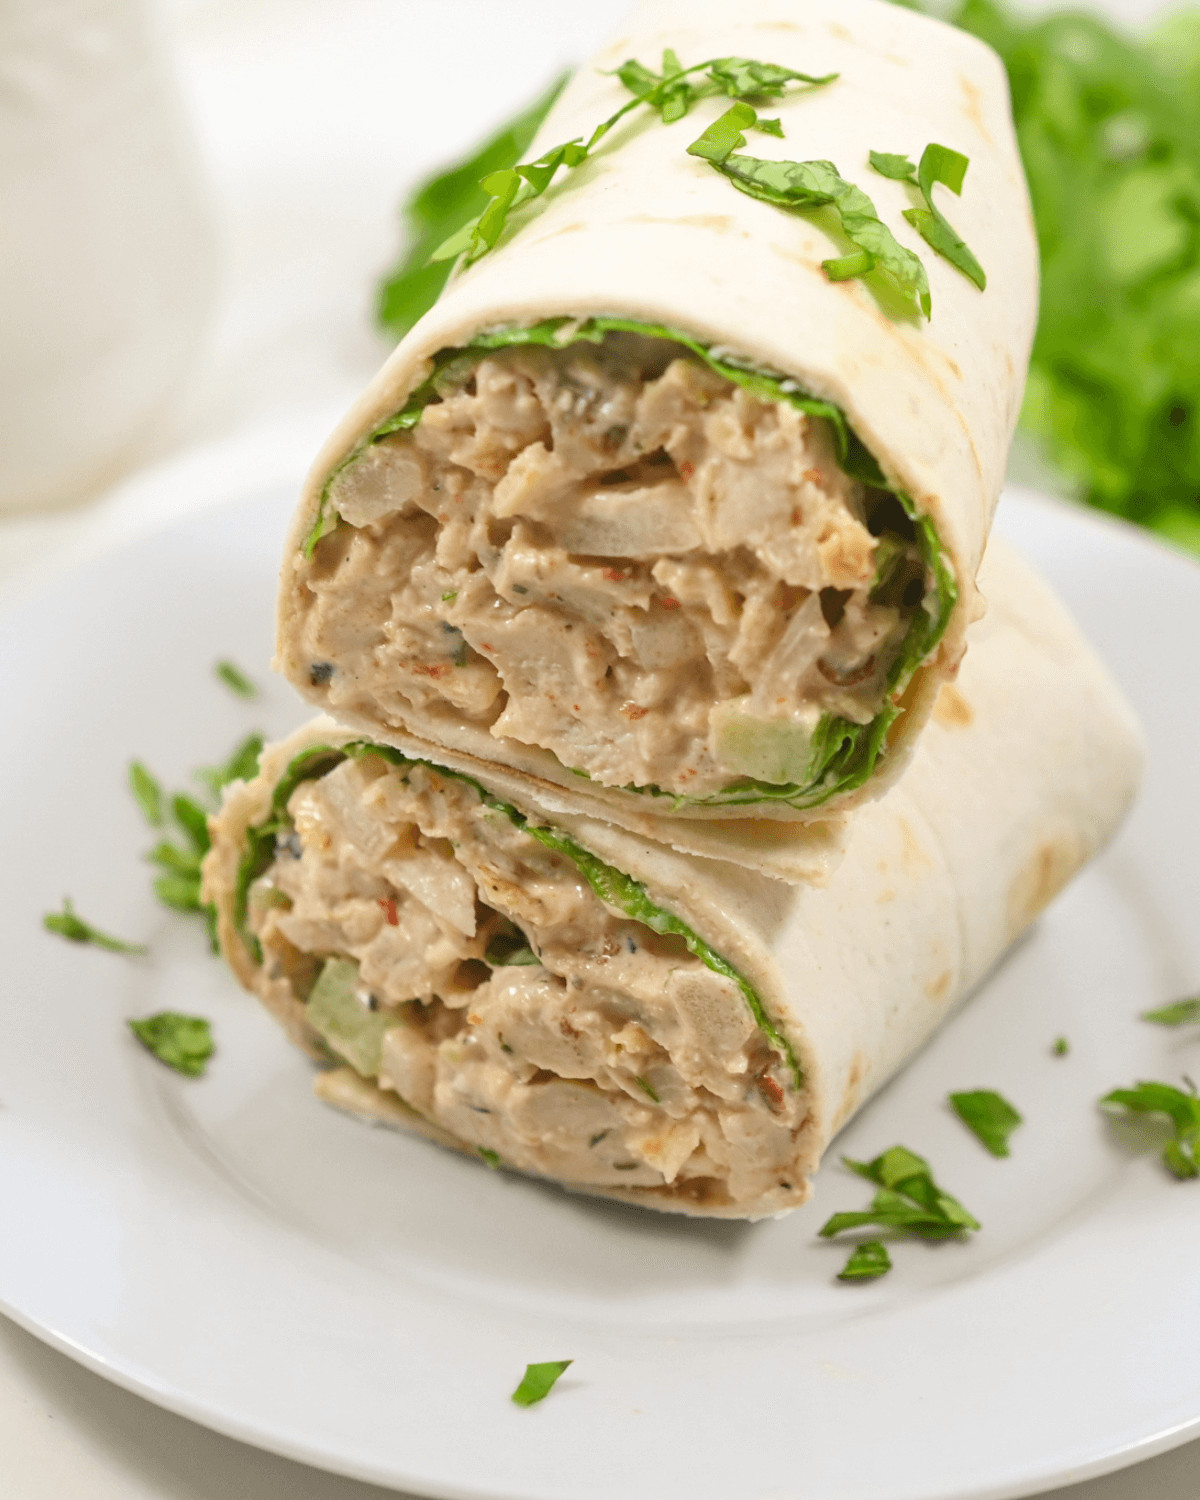 Chipotle chicken salad wrap garnished with fresh herbs on a white plate.